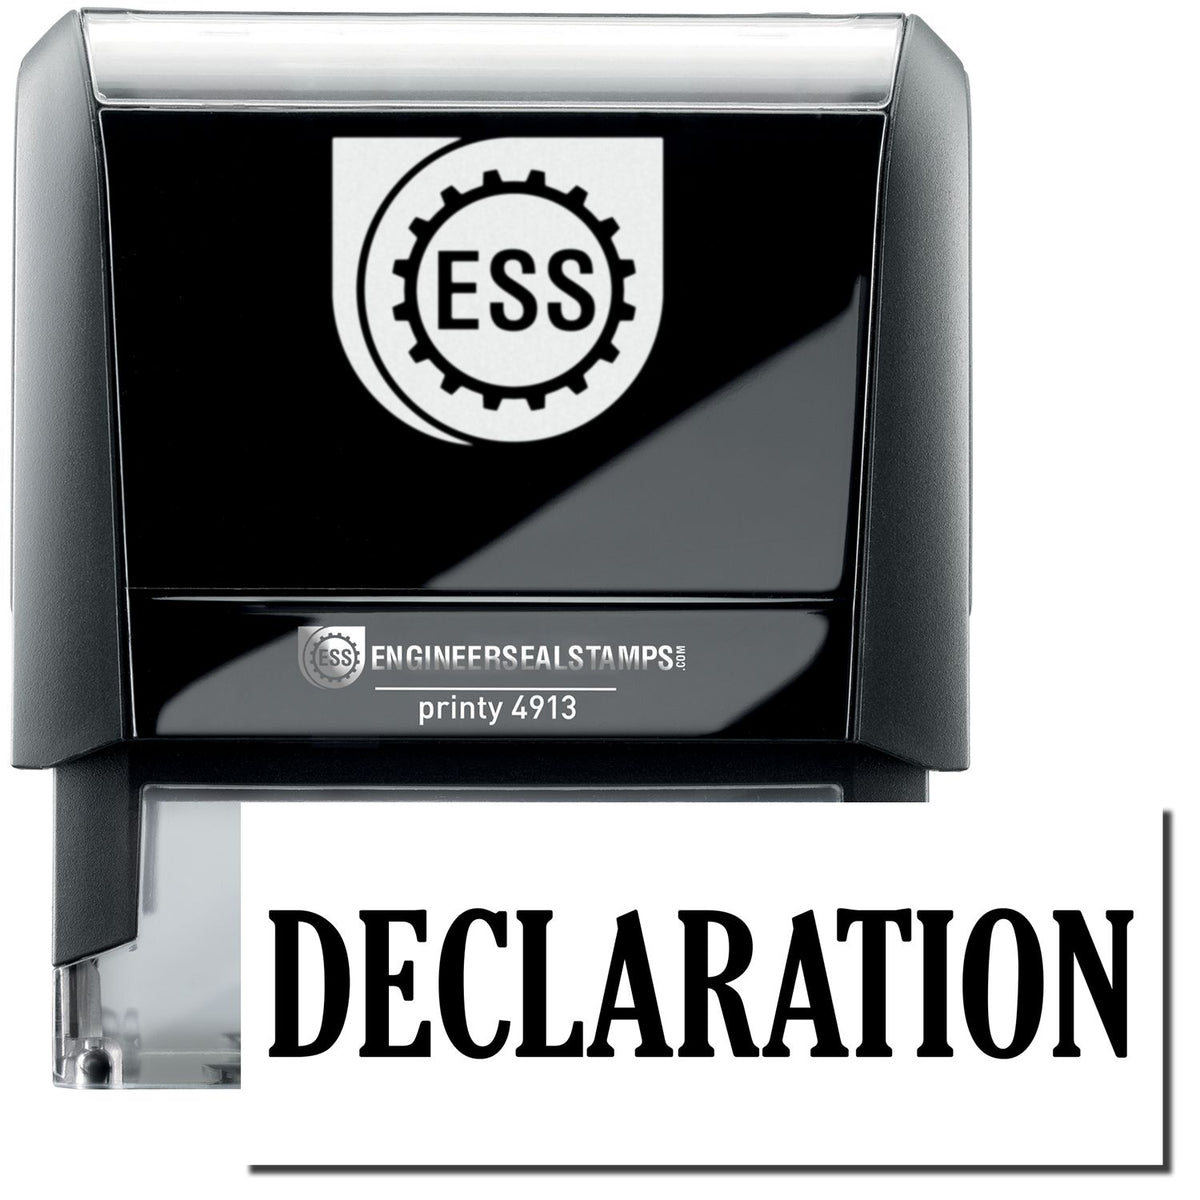 A self-inking stamp with a stamped image showing how the text &quot;DECLARATION&quot; in a large bold font is displayed by it.